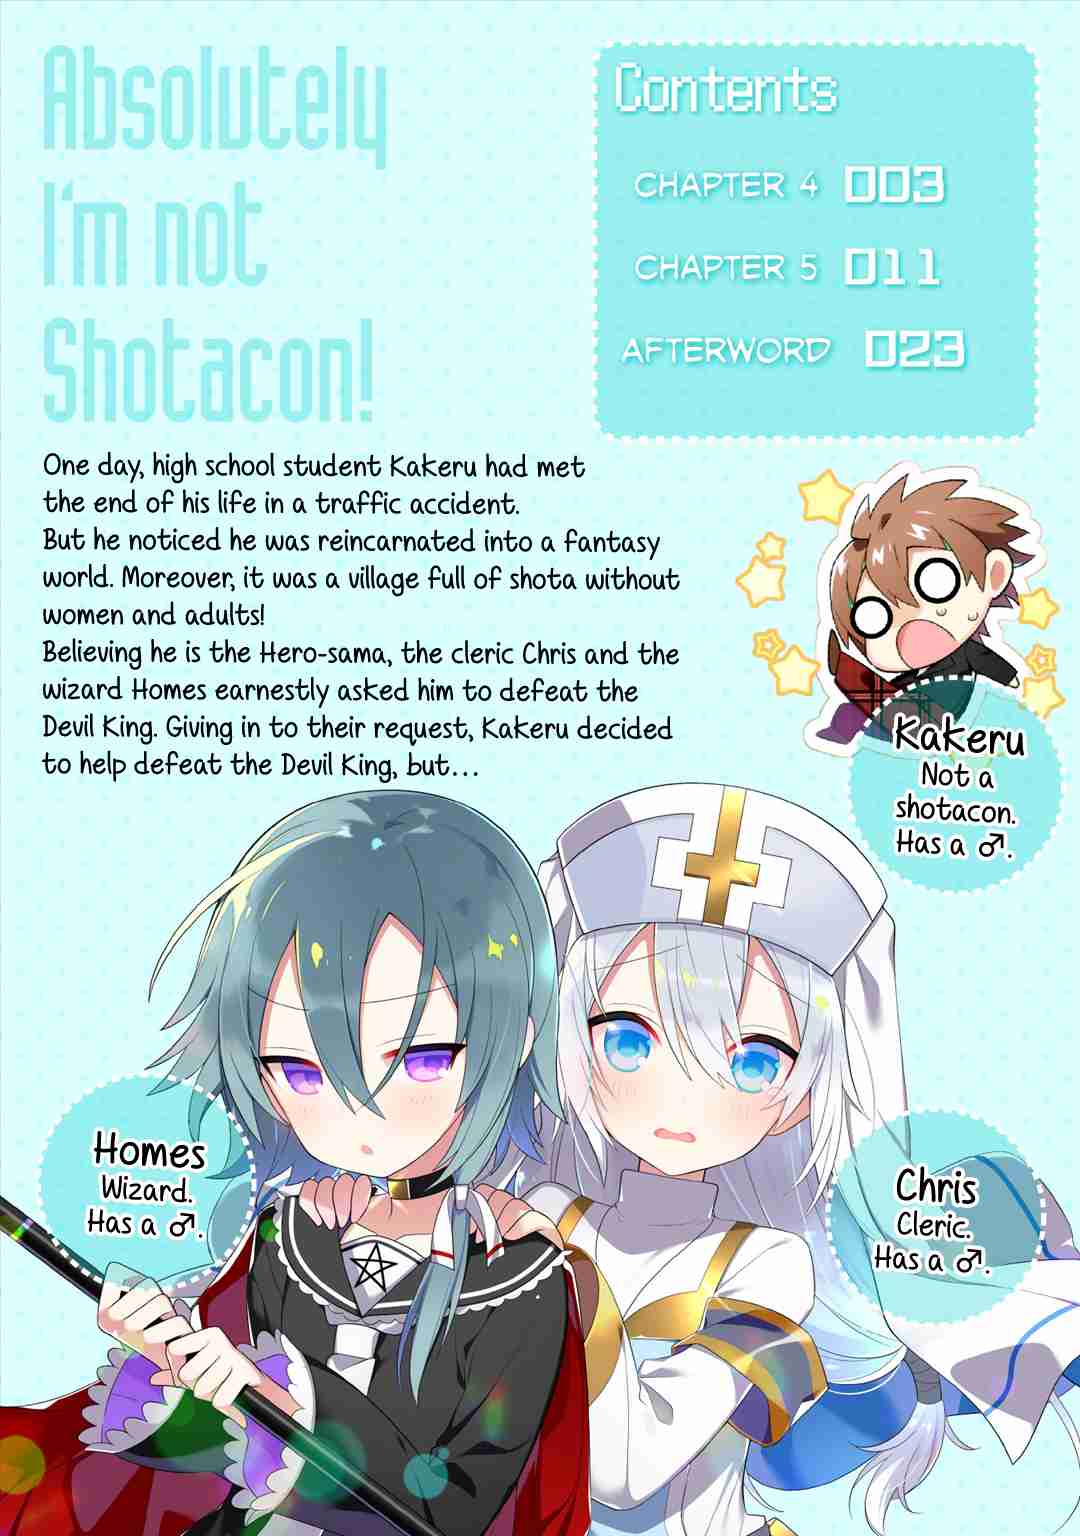 After Reincarnation, My Party Was Full Of Boys, But I'm Not A Shotacon! Ch. 4